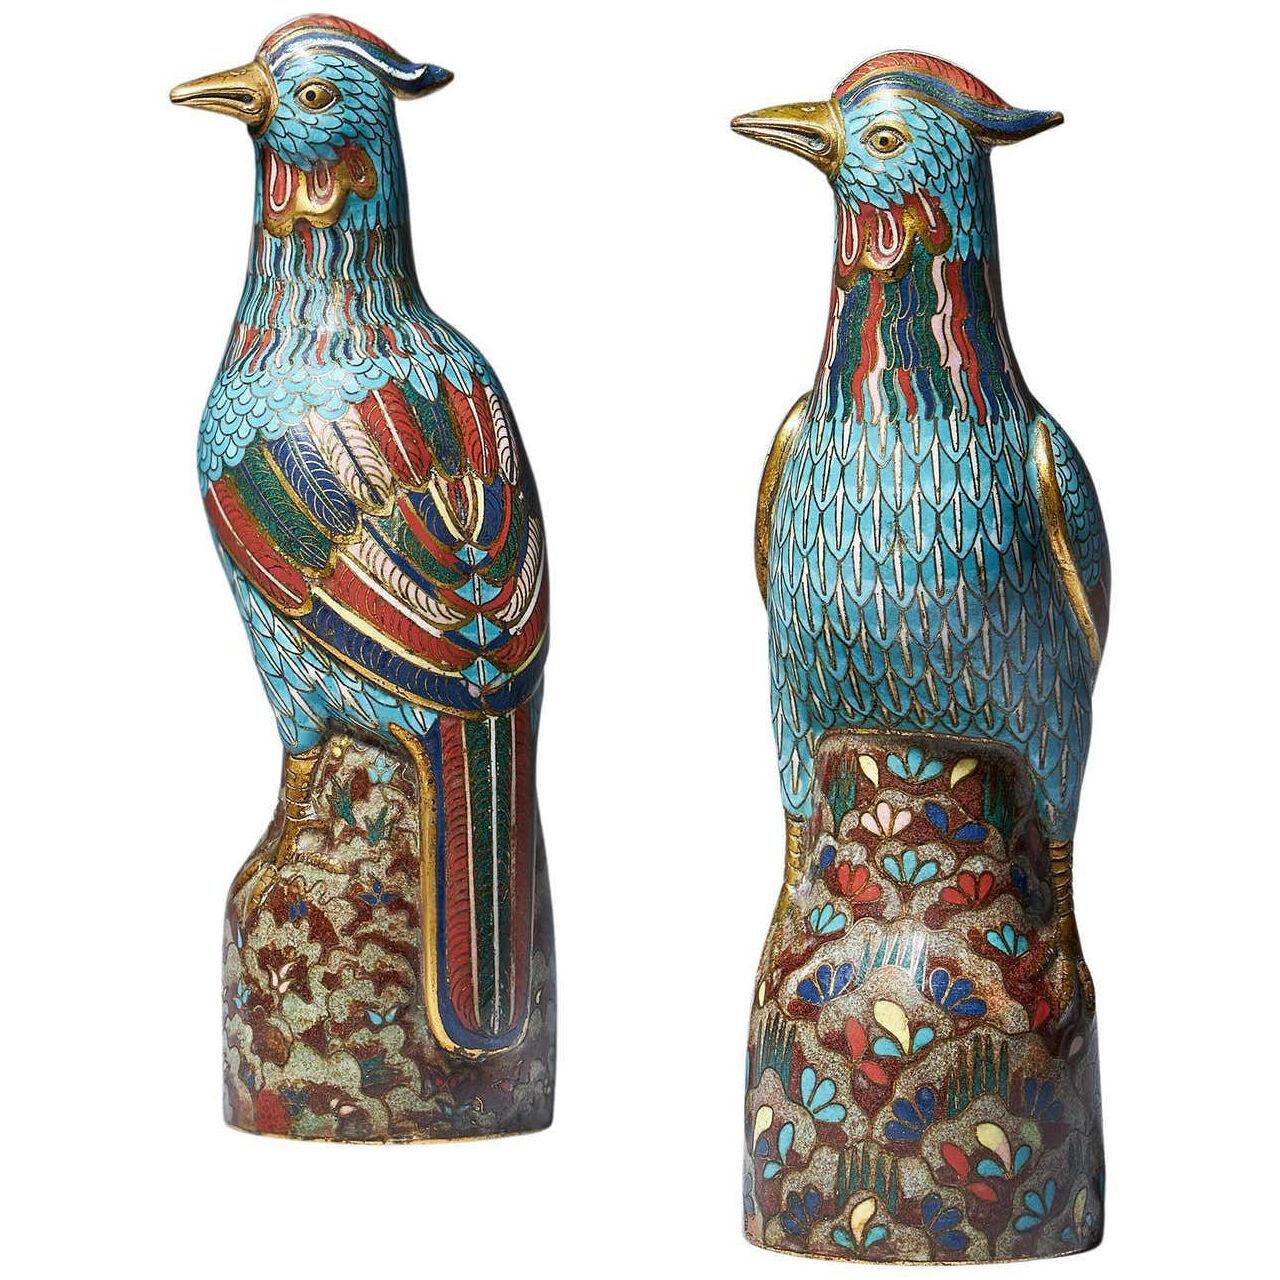 A Pair of 19th Century Late Qing Dynasty Chinese Cloisonné Phoenix Figures